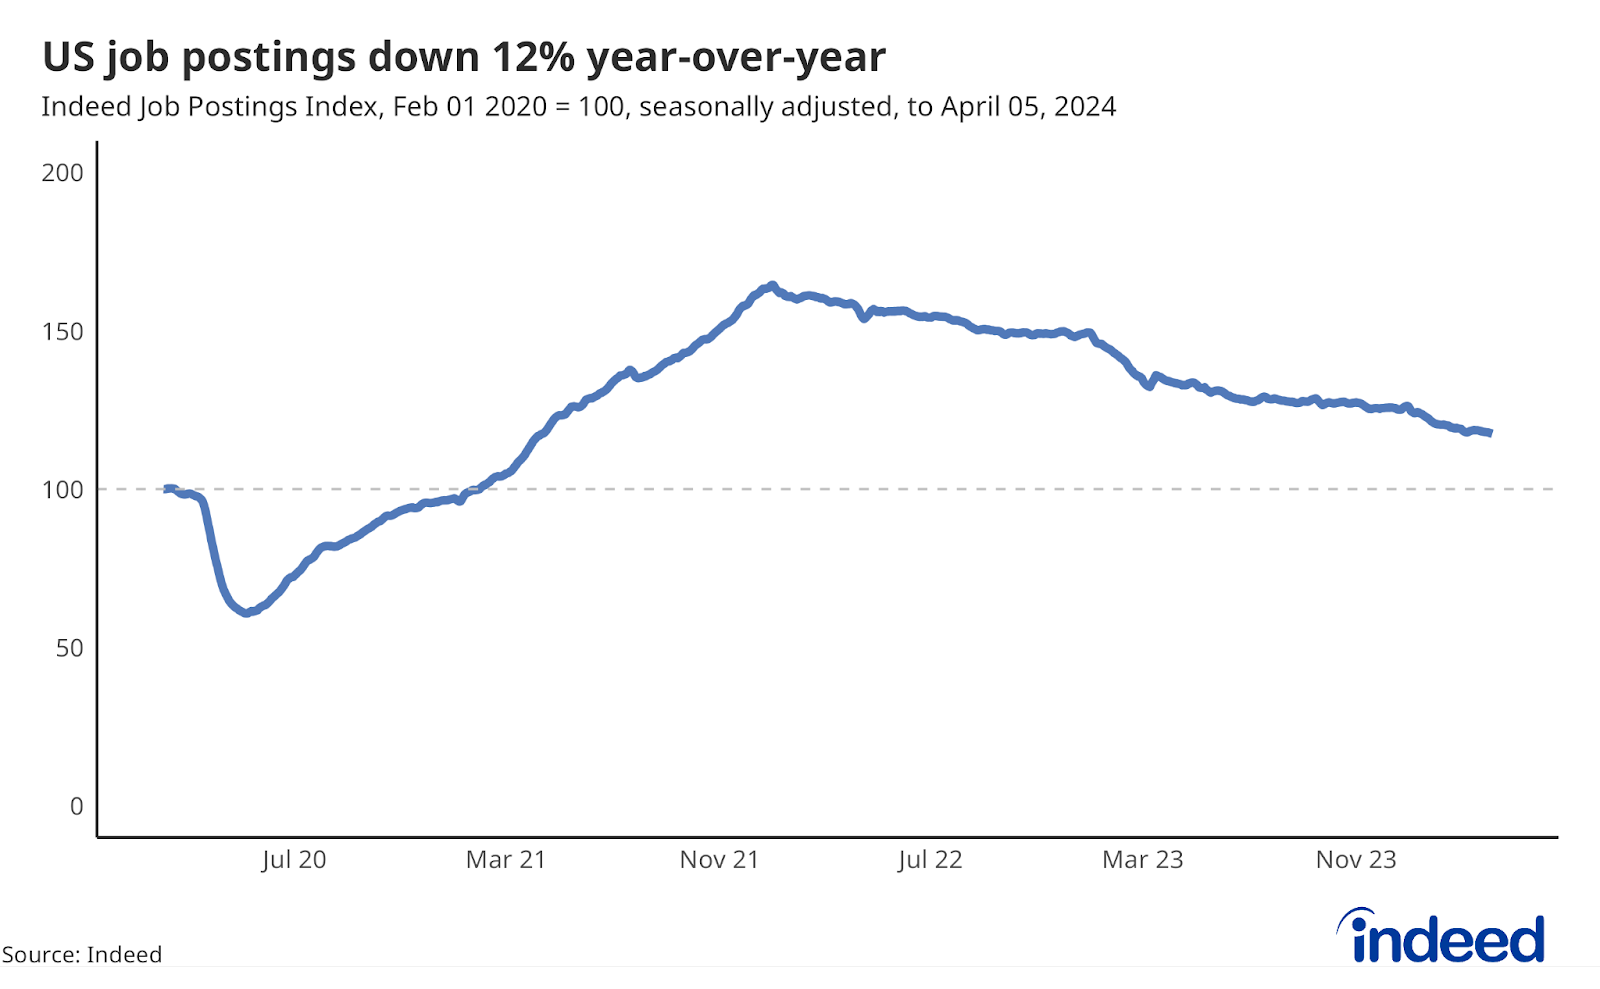 Line graph showing the change in Indeed job postings since their pre-pandemic baseline, through April 5th, 2024. US job postings have fallen 12% over the past year.